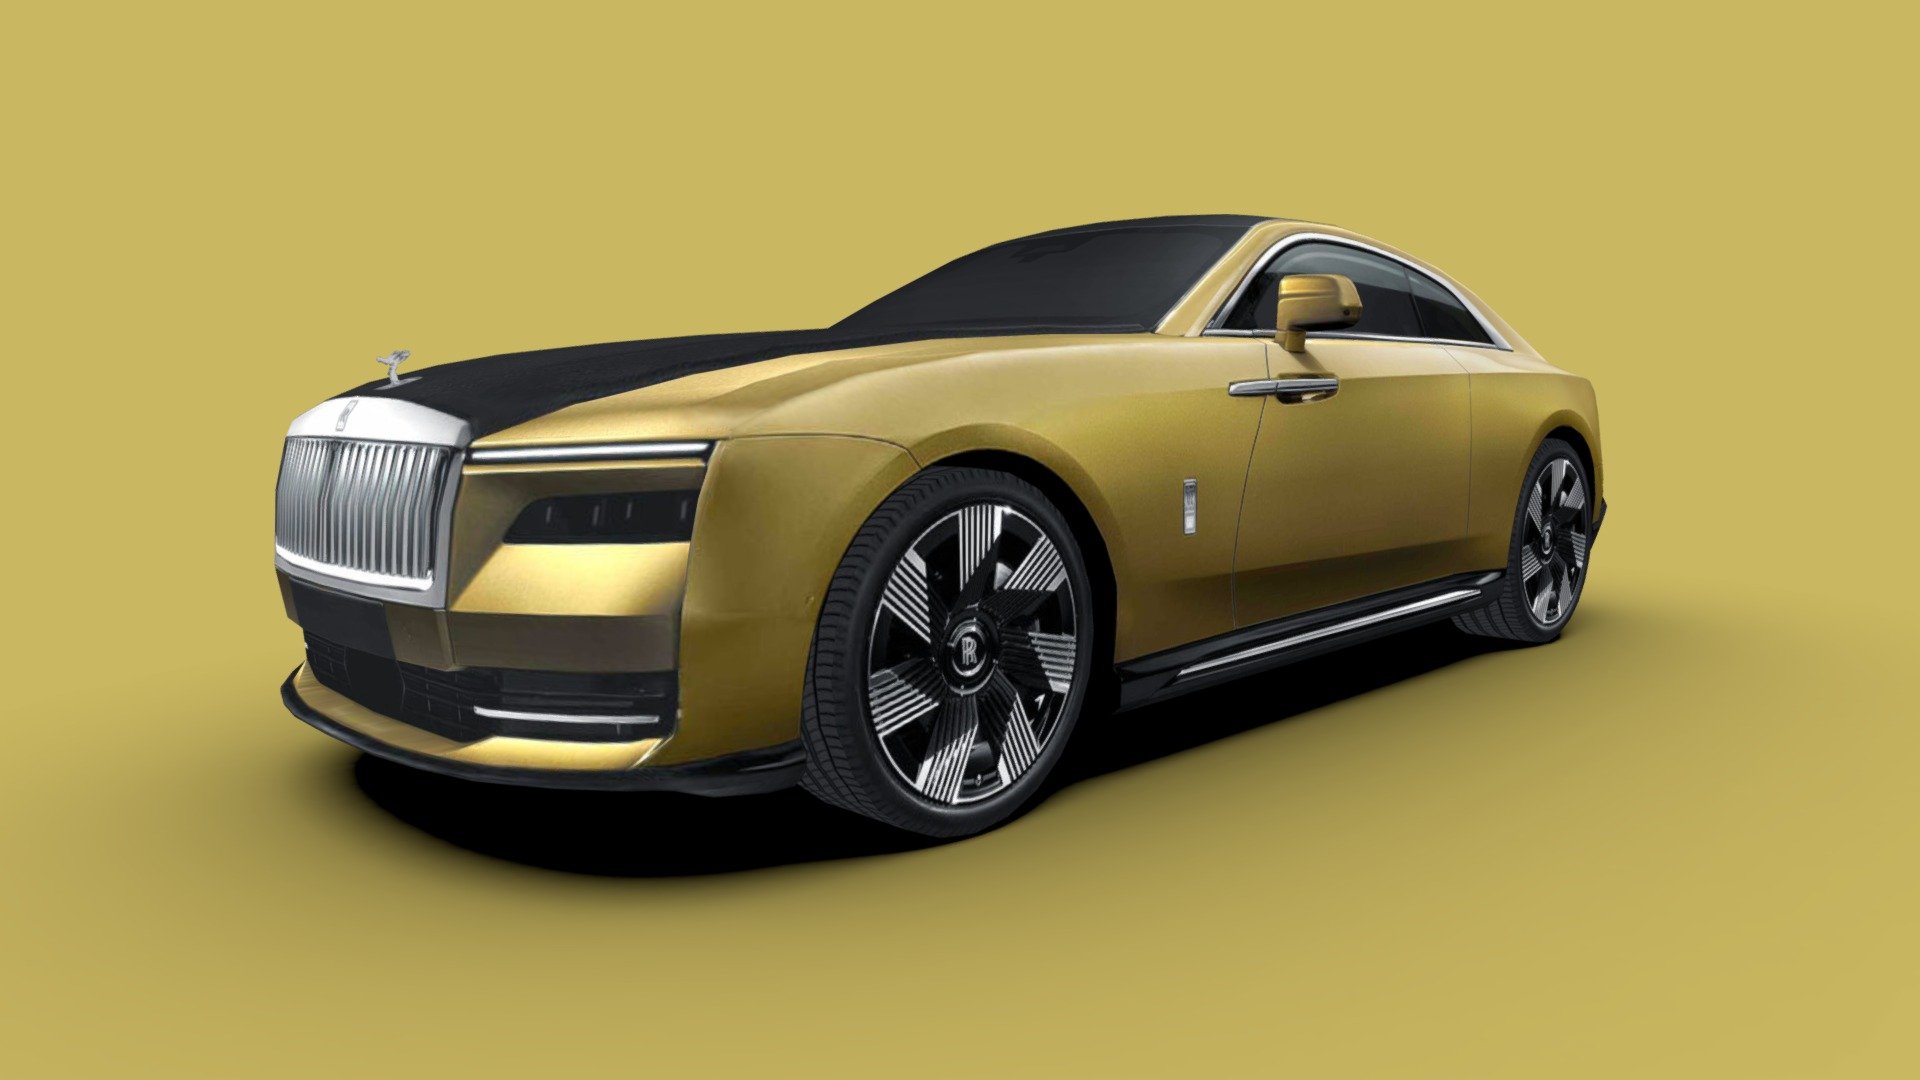 3d model of the 2024 Rolls-Royce Spectre, a full-size all-electric luxury car.

The model is very low-poly, full-scale, real photos texture (single 2048 x 2048 png).

Package includes 5 file formats and texture (3ds, fbx, dae, obj and skp)

Hope you enjoy it.

José Bronze - Rolls-Royce Spectre 2024 - Buy Royalty Free 3D model by Jose Bronze (@pinceladas3d) 3d model